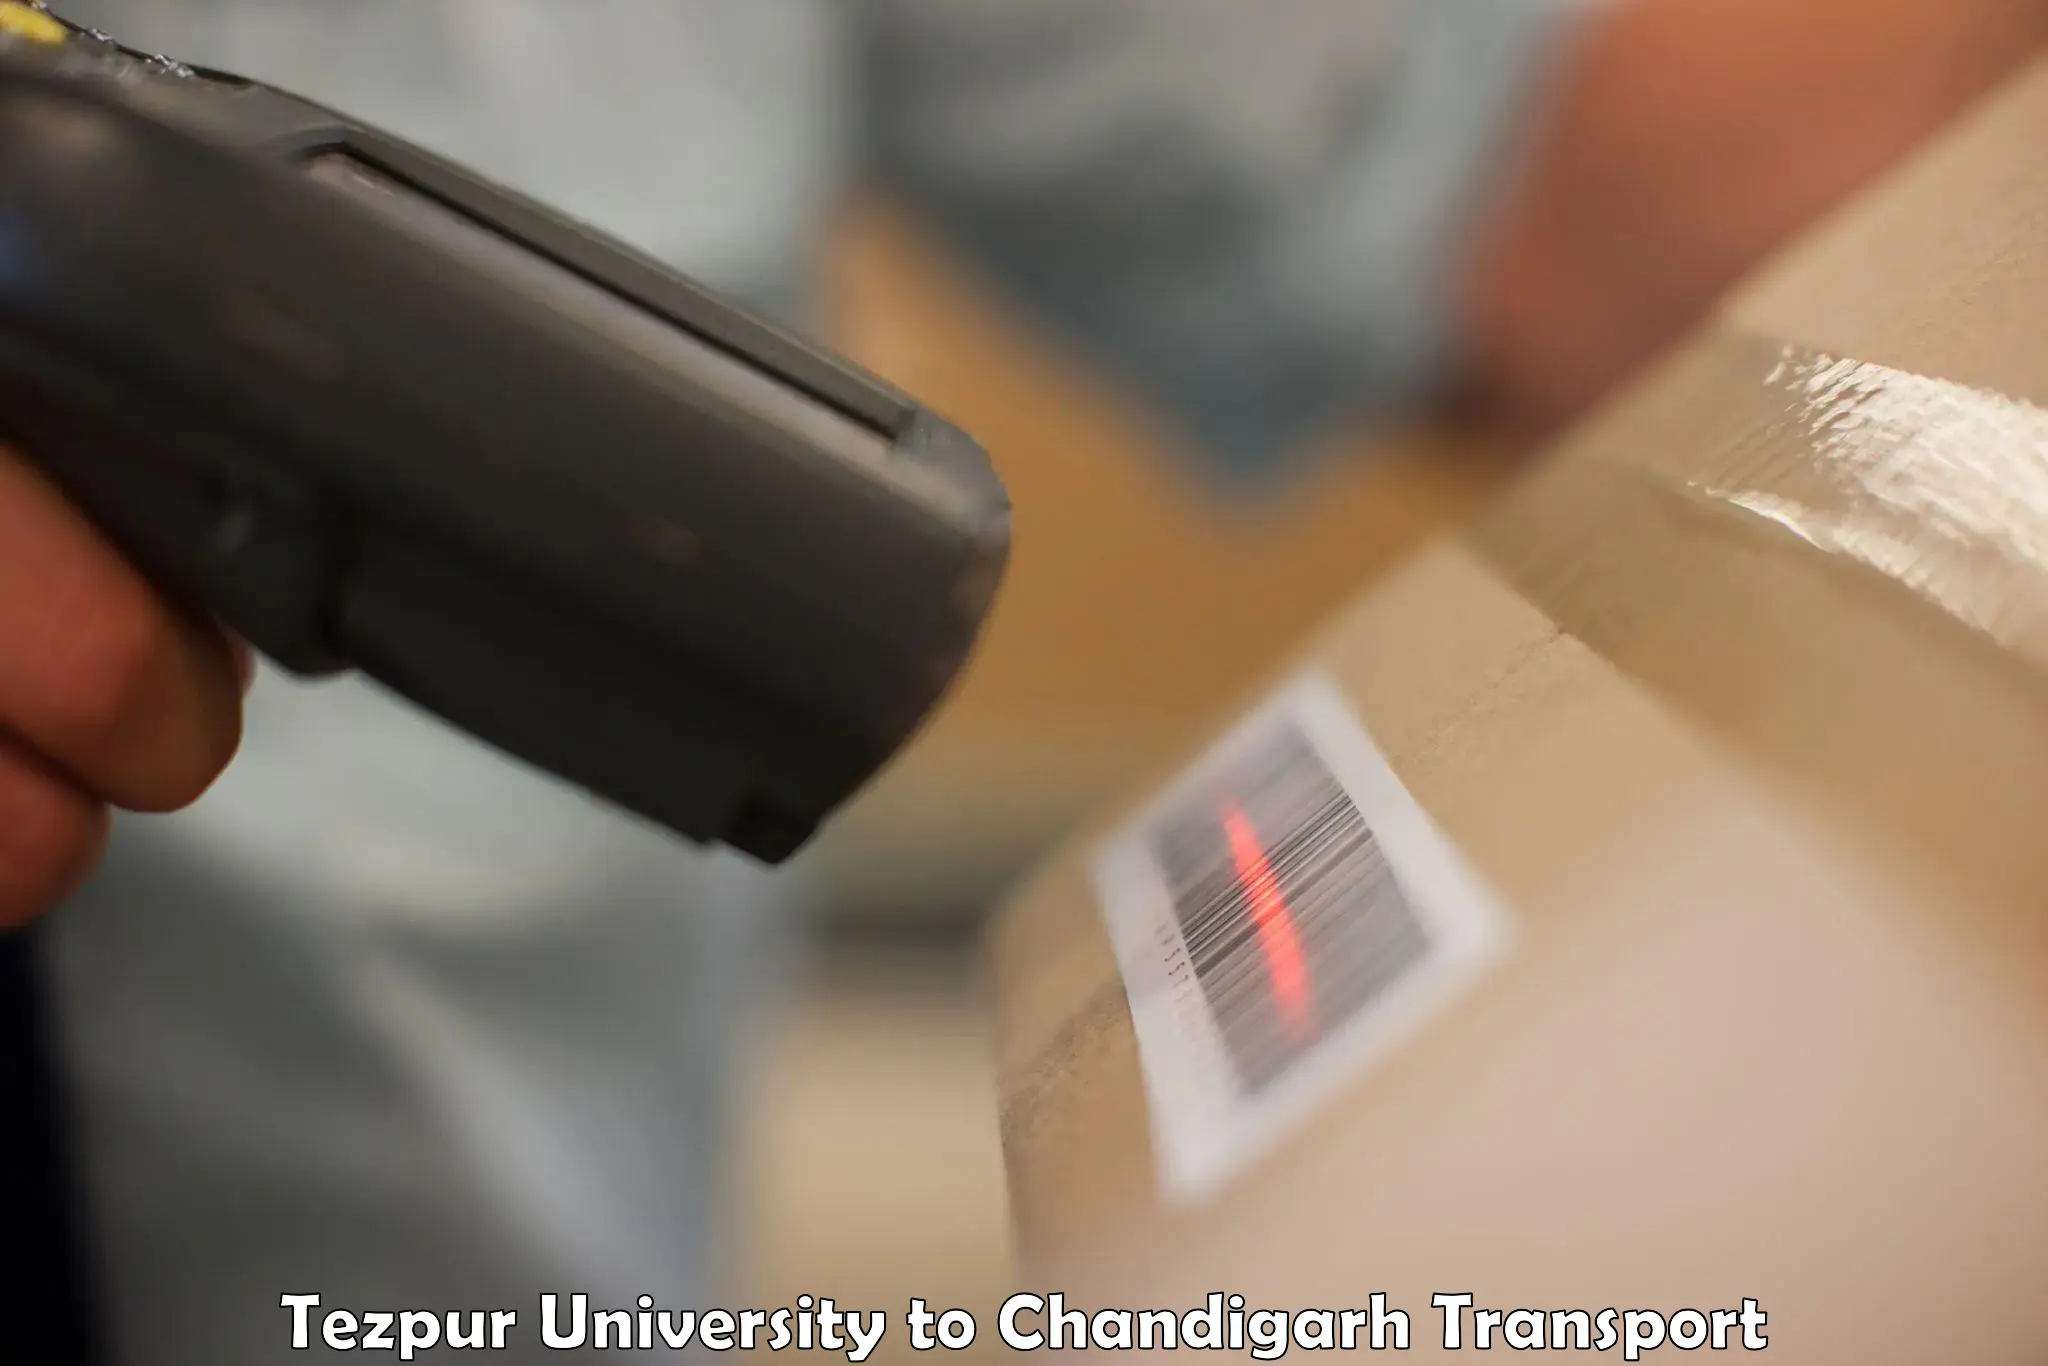 Package delivery services Tezpur University to Chandigarh